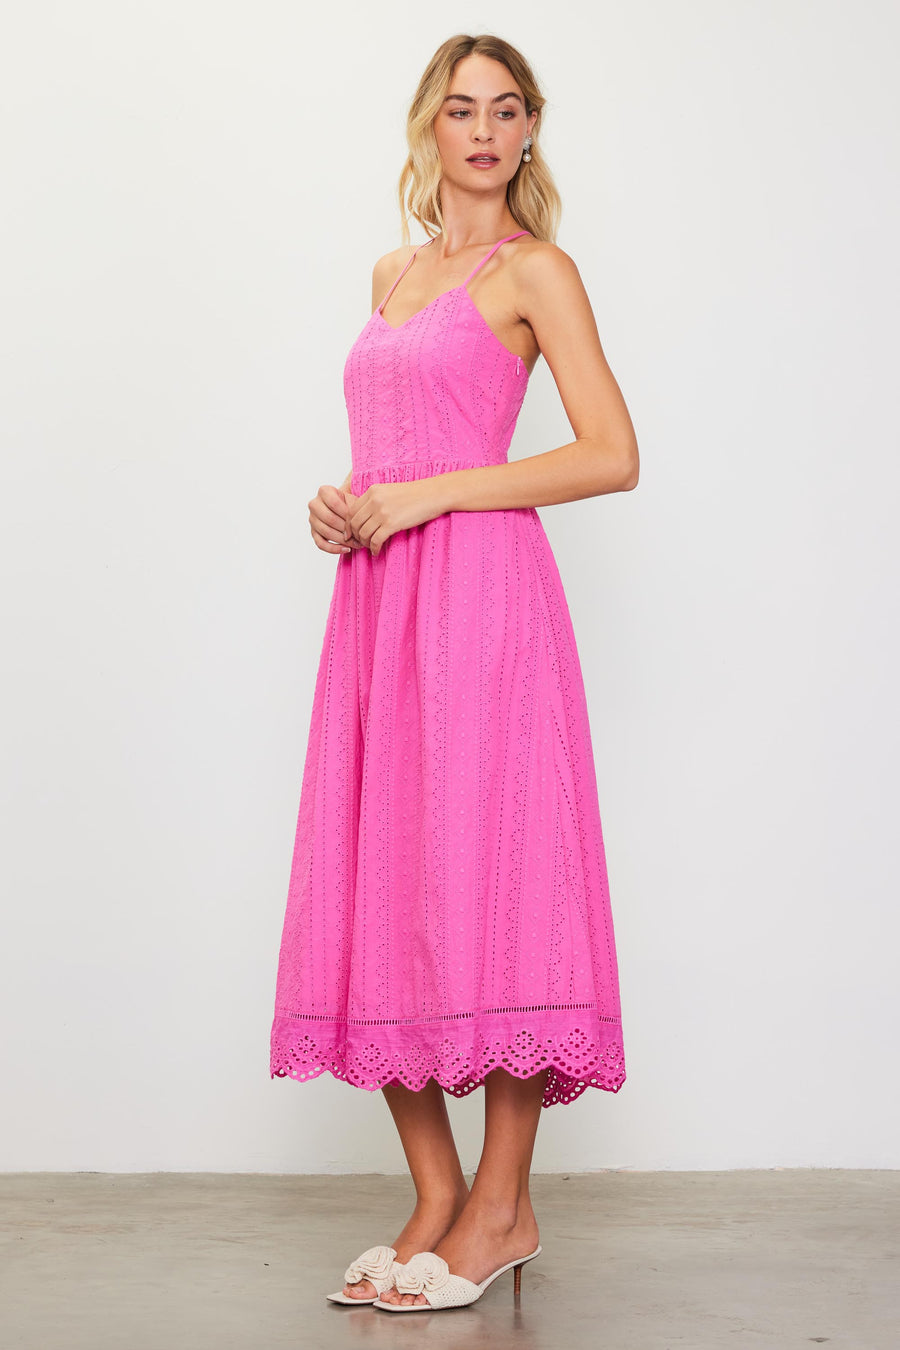 SKIES ARE BLUE Eyelet Lace Smocked Dress - Pink Bubble Gum